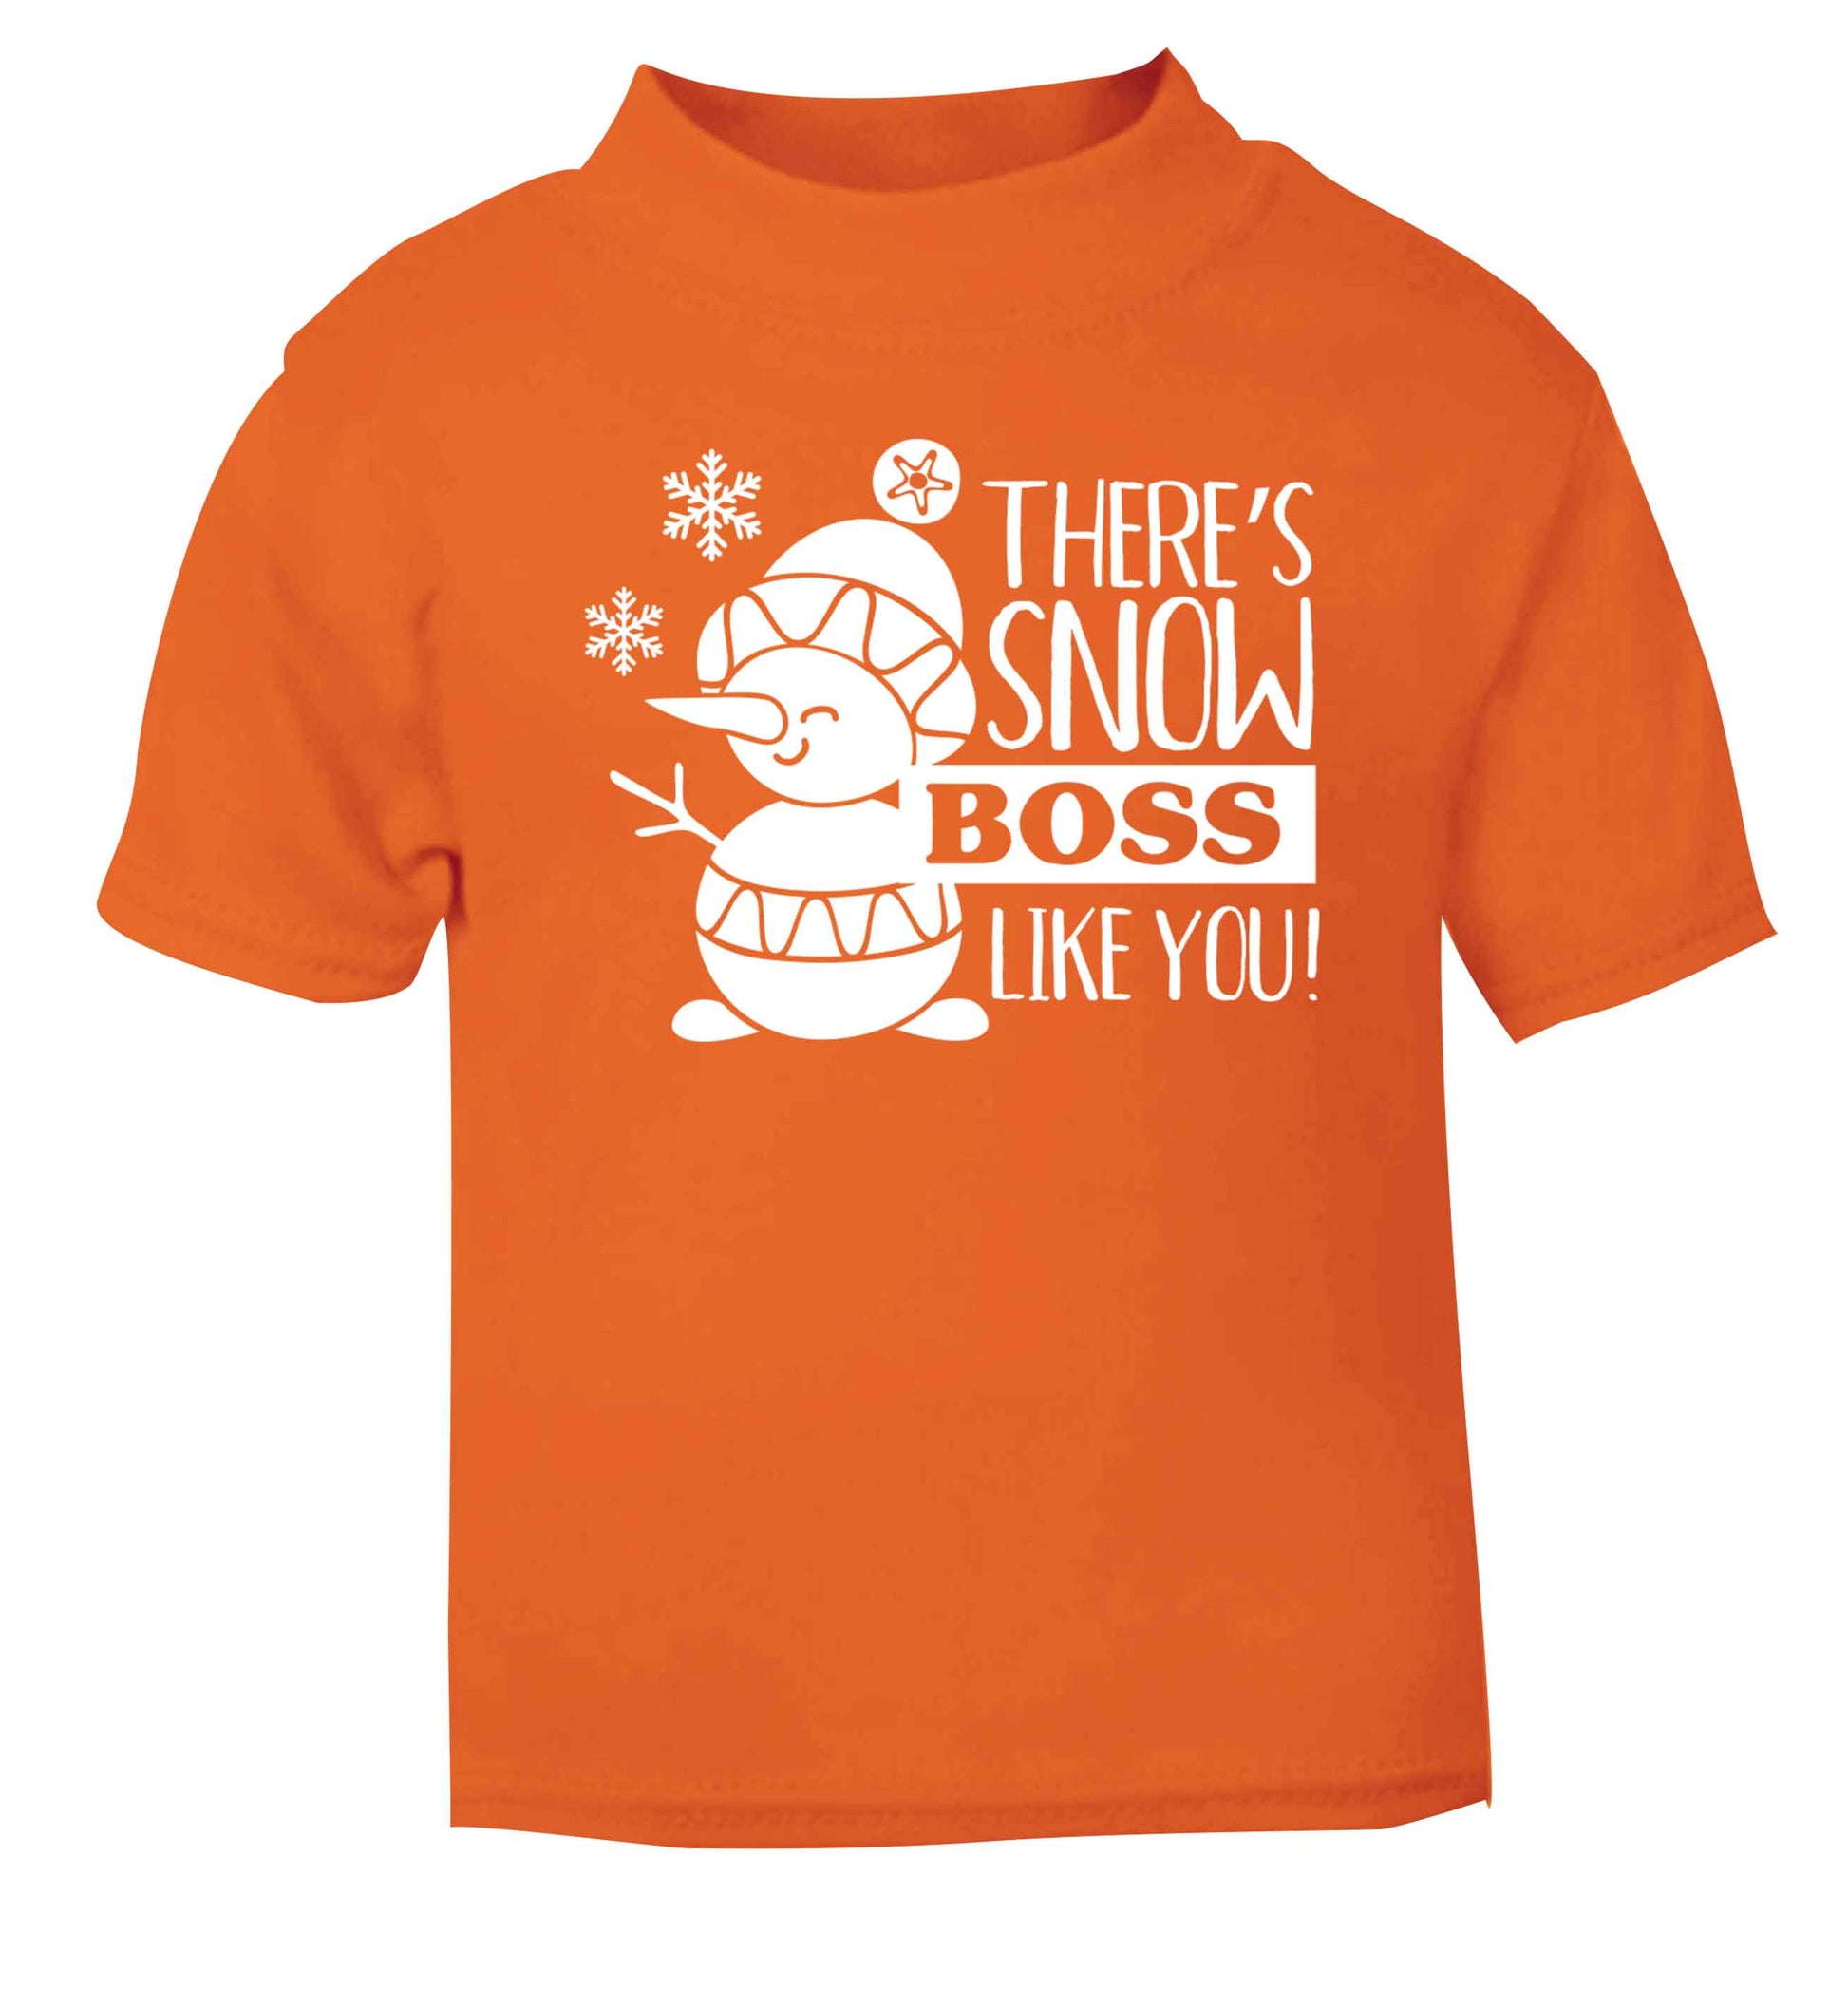 There's snow boss like you orange baby toddler Tshirt 2 Years